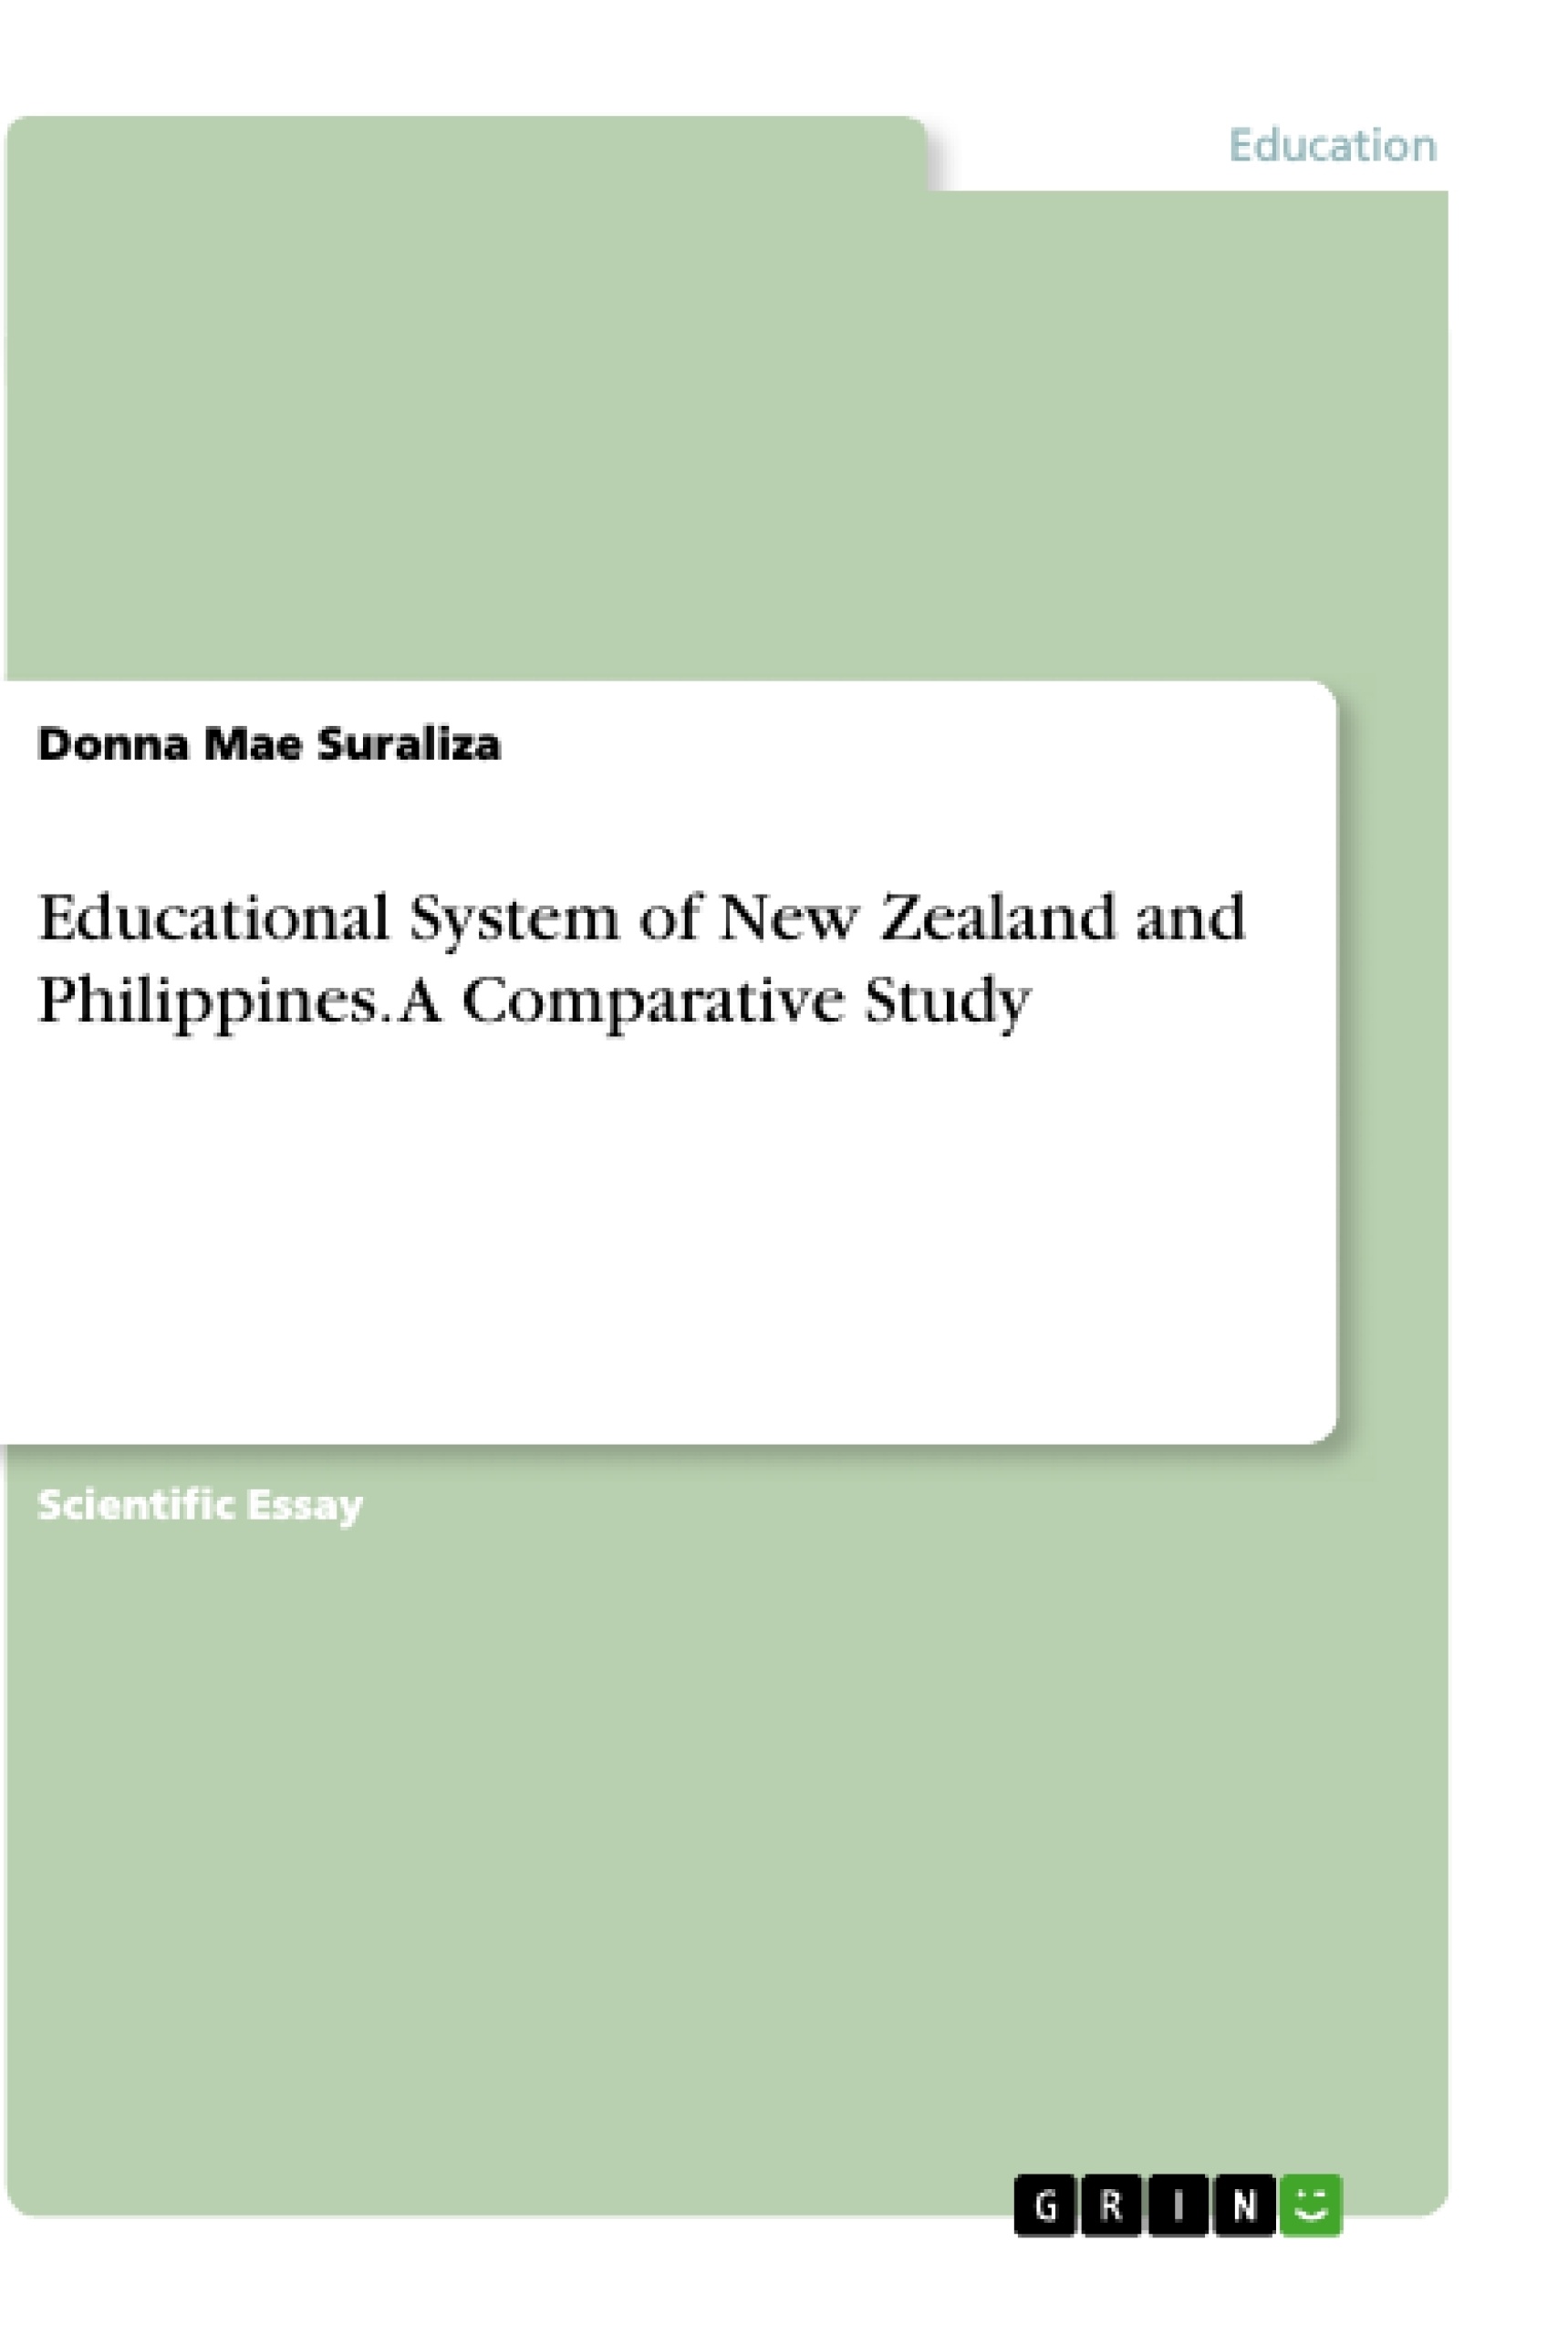 Title: Educational System of New Zealand and Philippines.  A Comparative Study